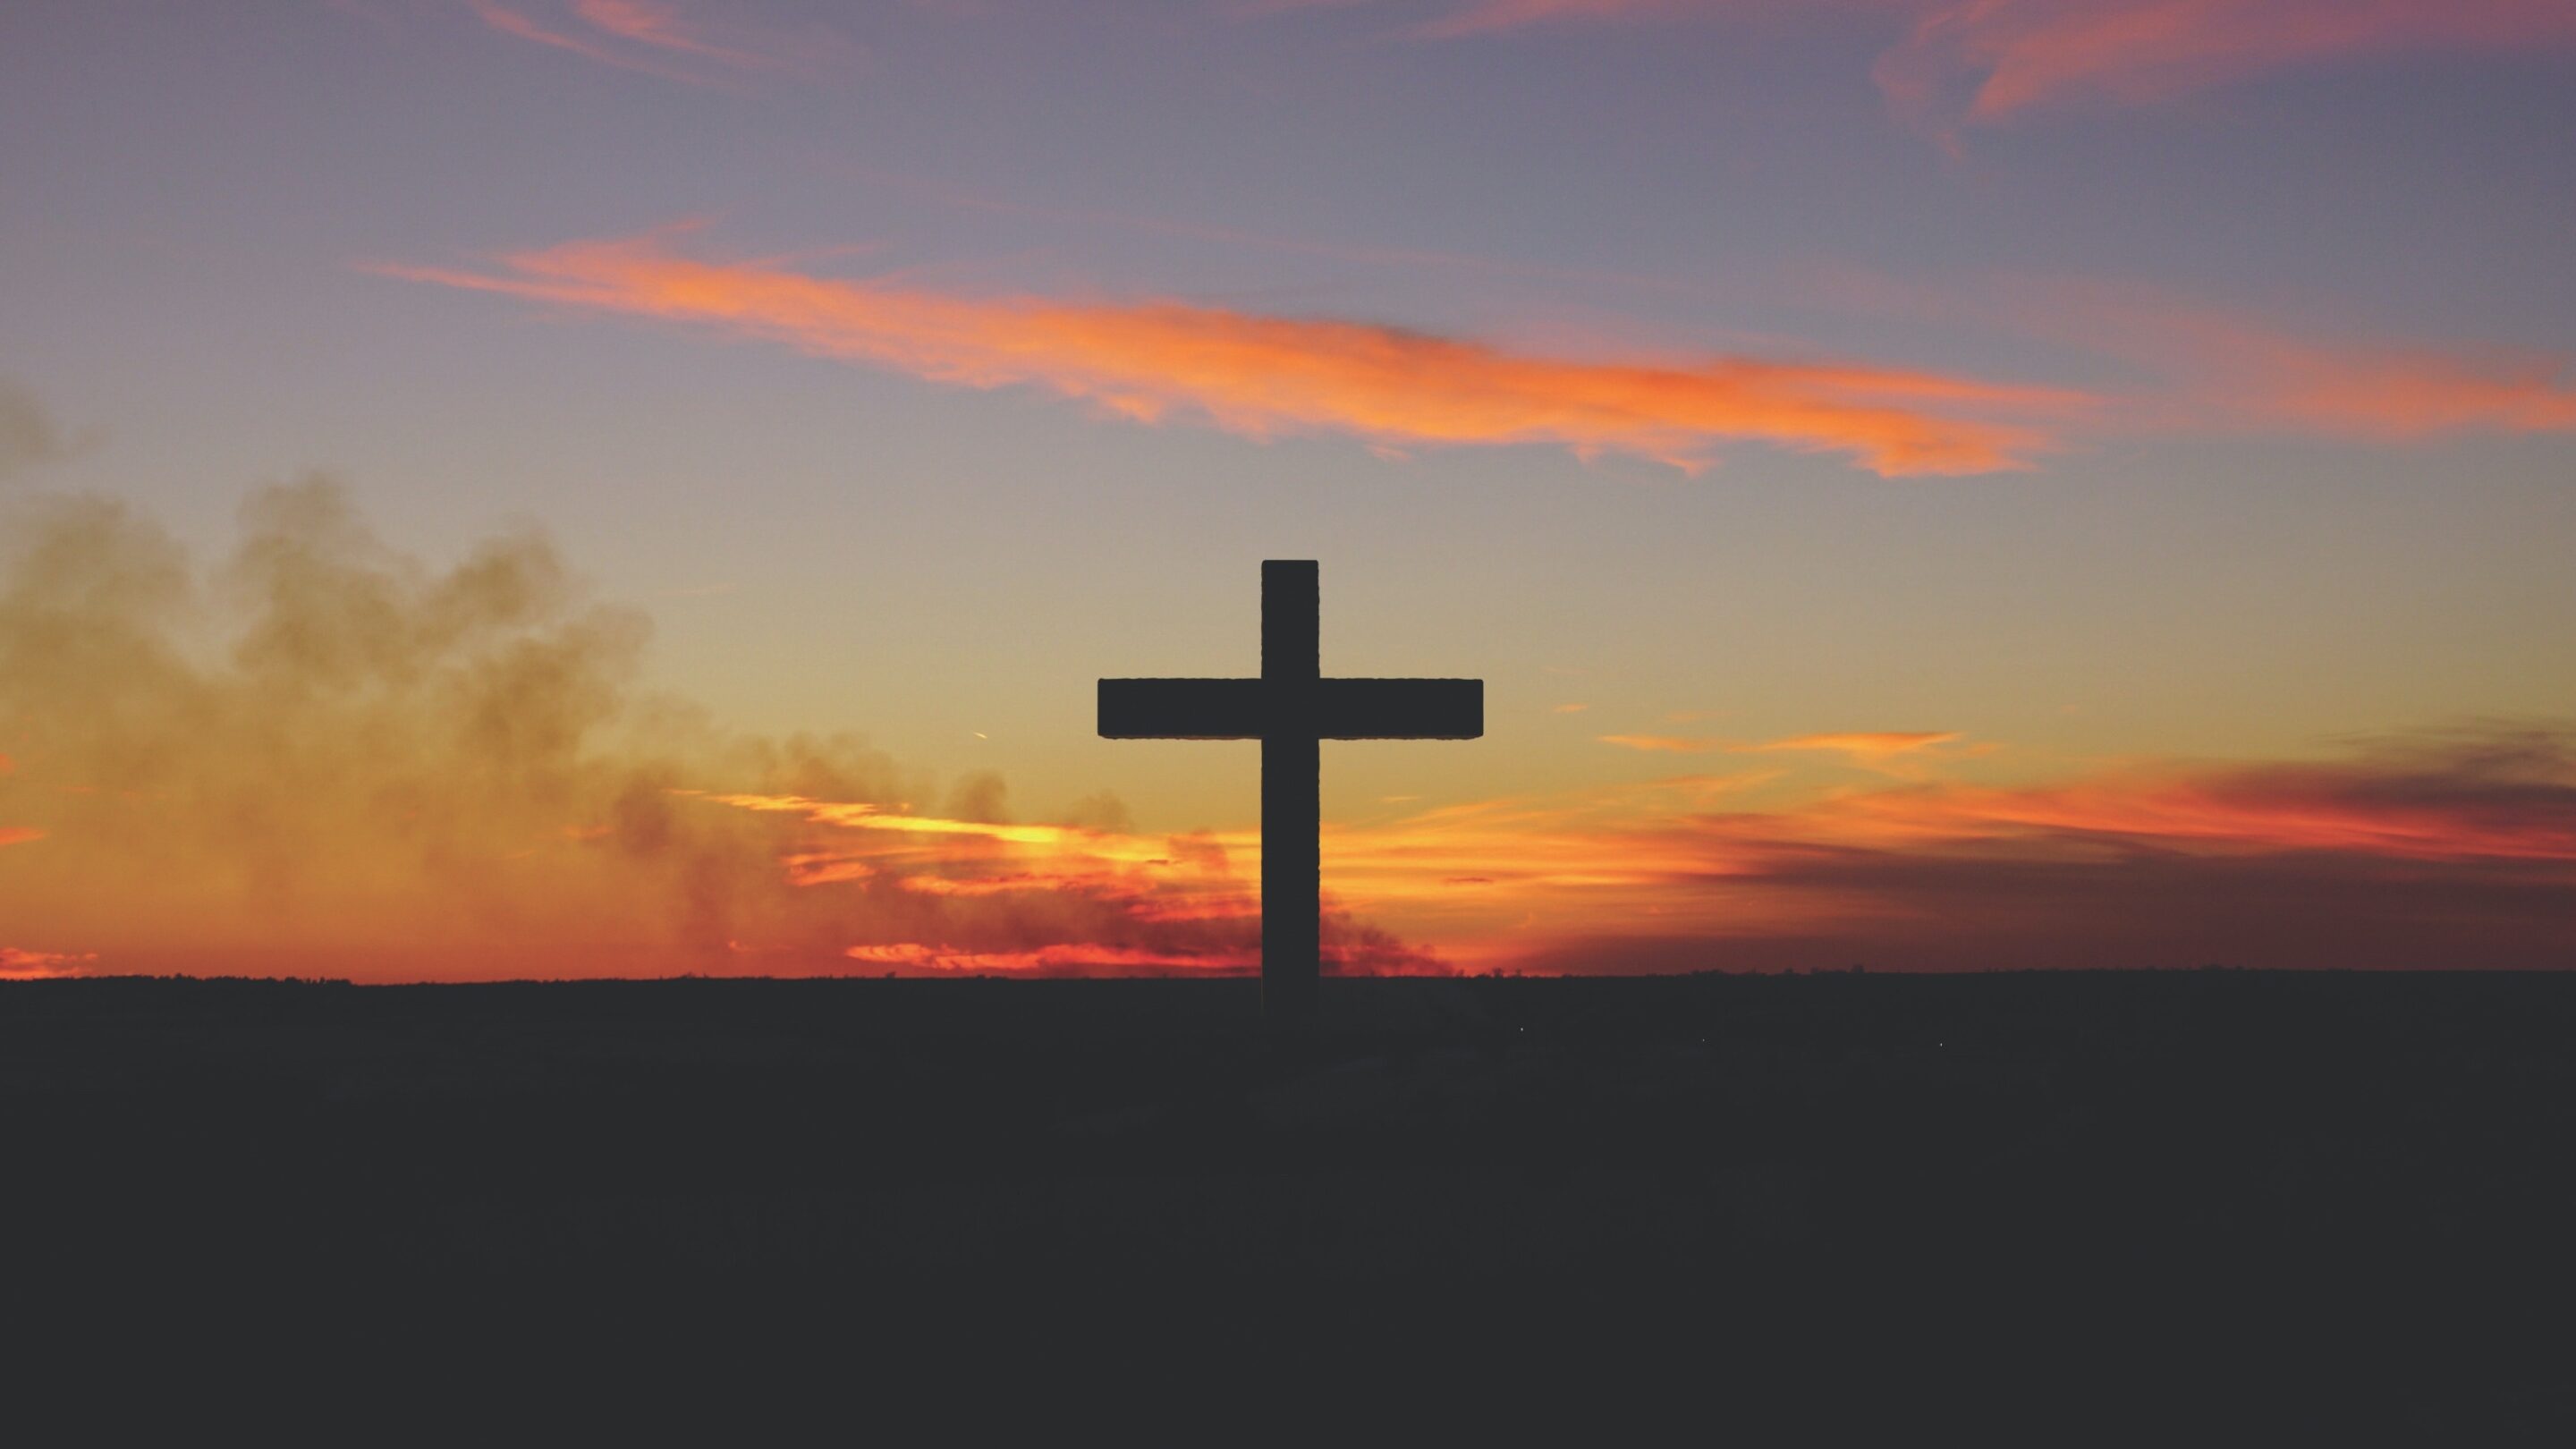 Cross with the sun setting behind, red and orange colours lighting up the clouds.